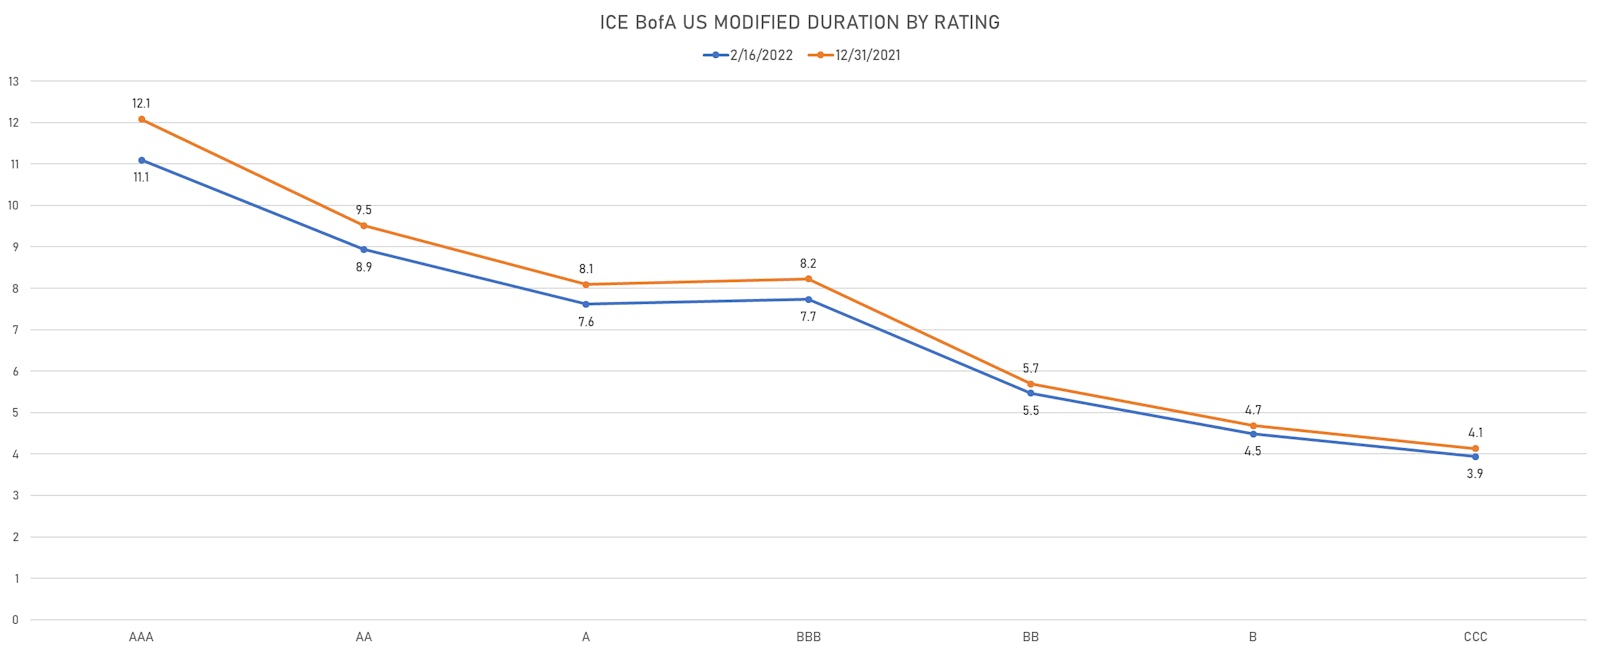 ICE BofAML US Corporate Duration By Rating | Sources: ϕpost, Refinitiv data